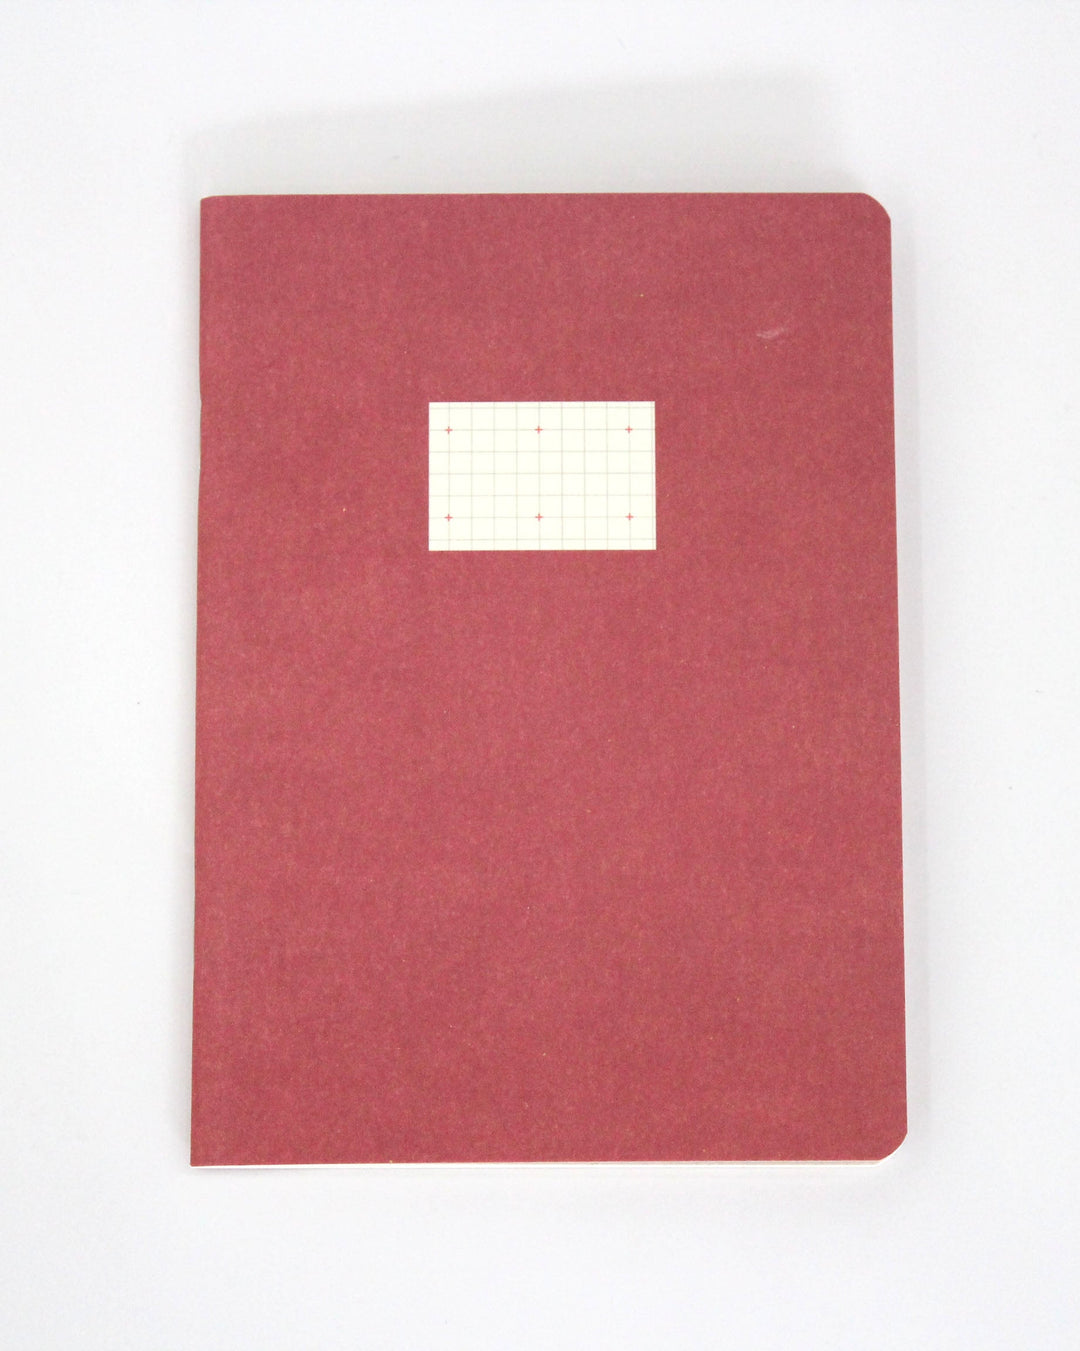 Paperways Compat Notebook 01 Cross Grid Red White Back Ground Photo